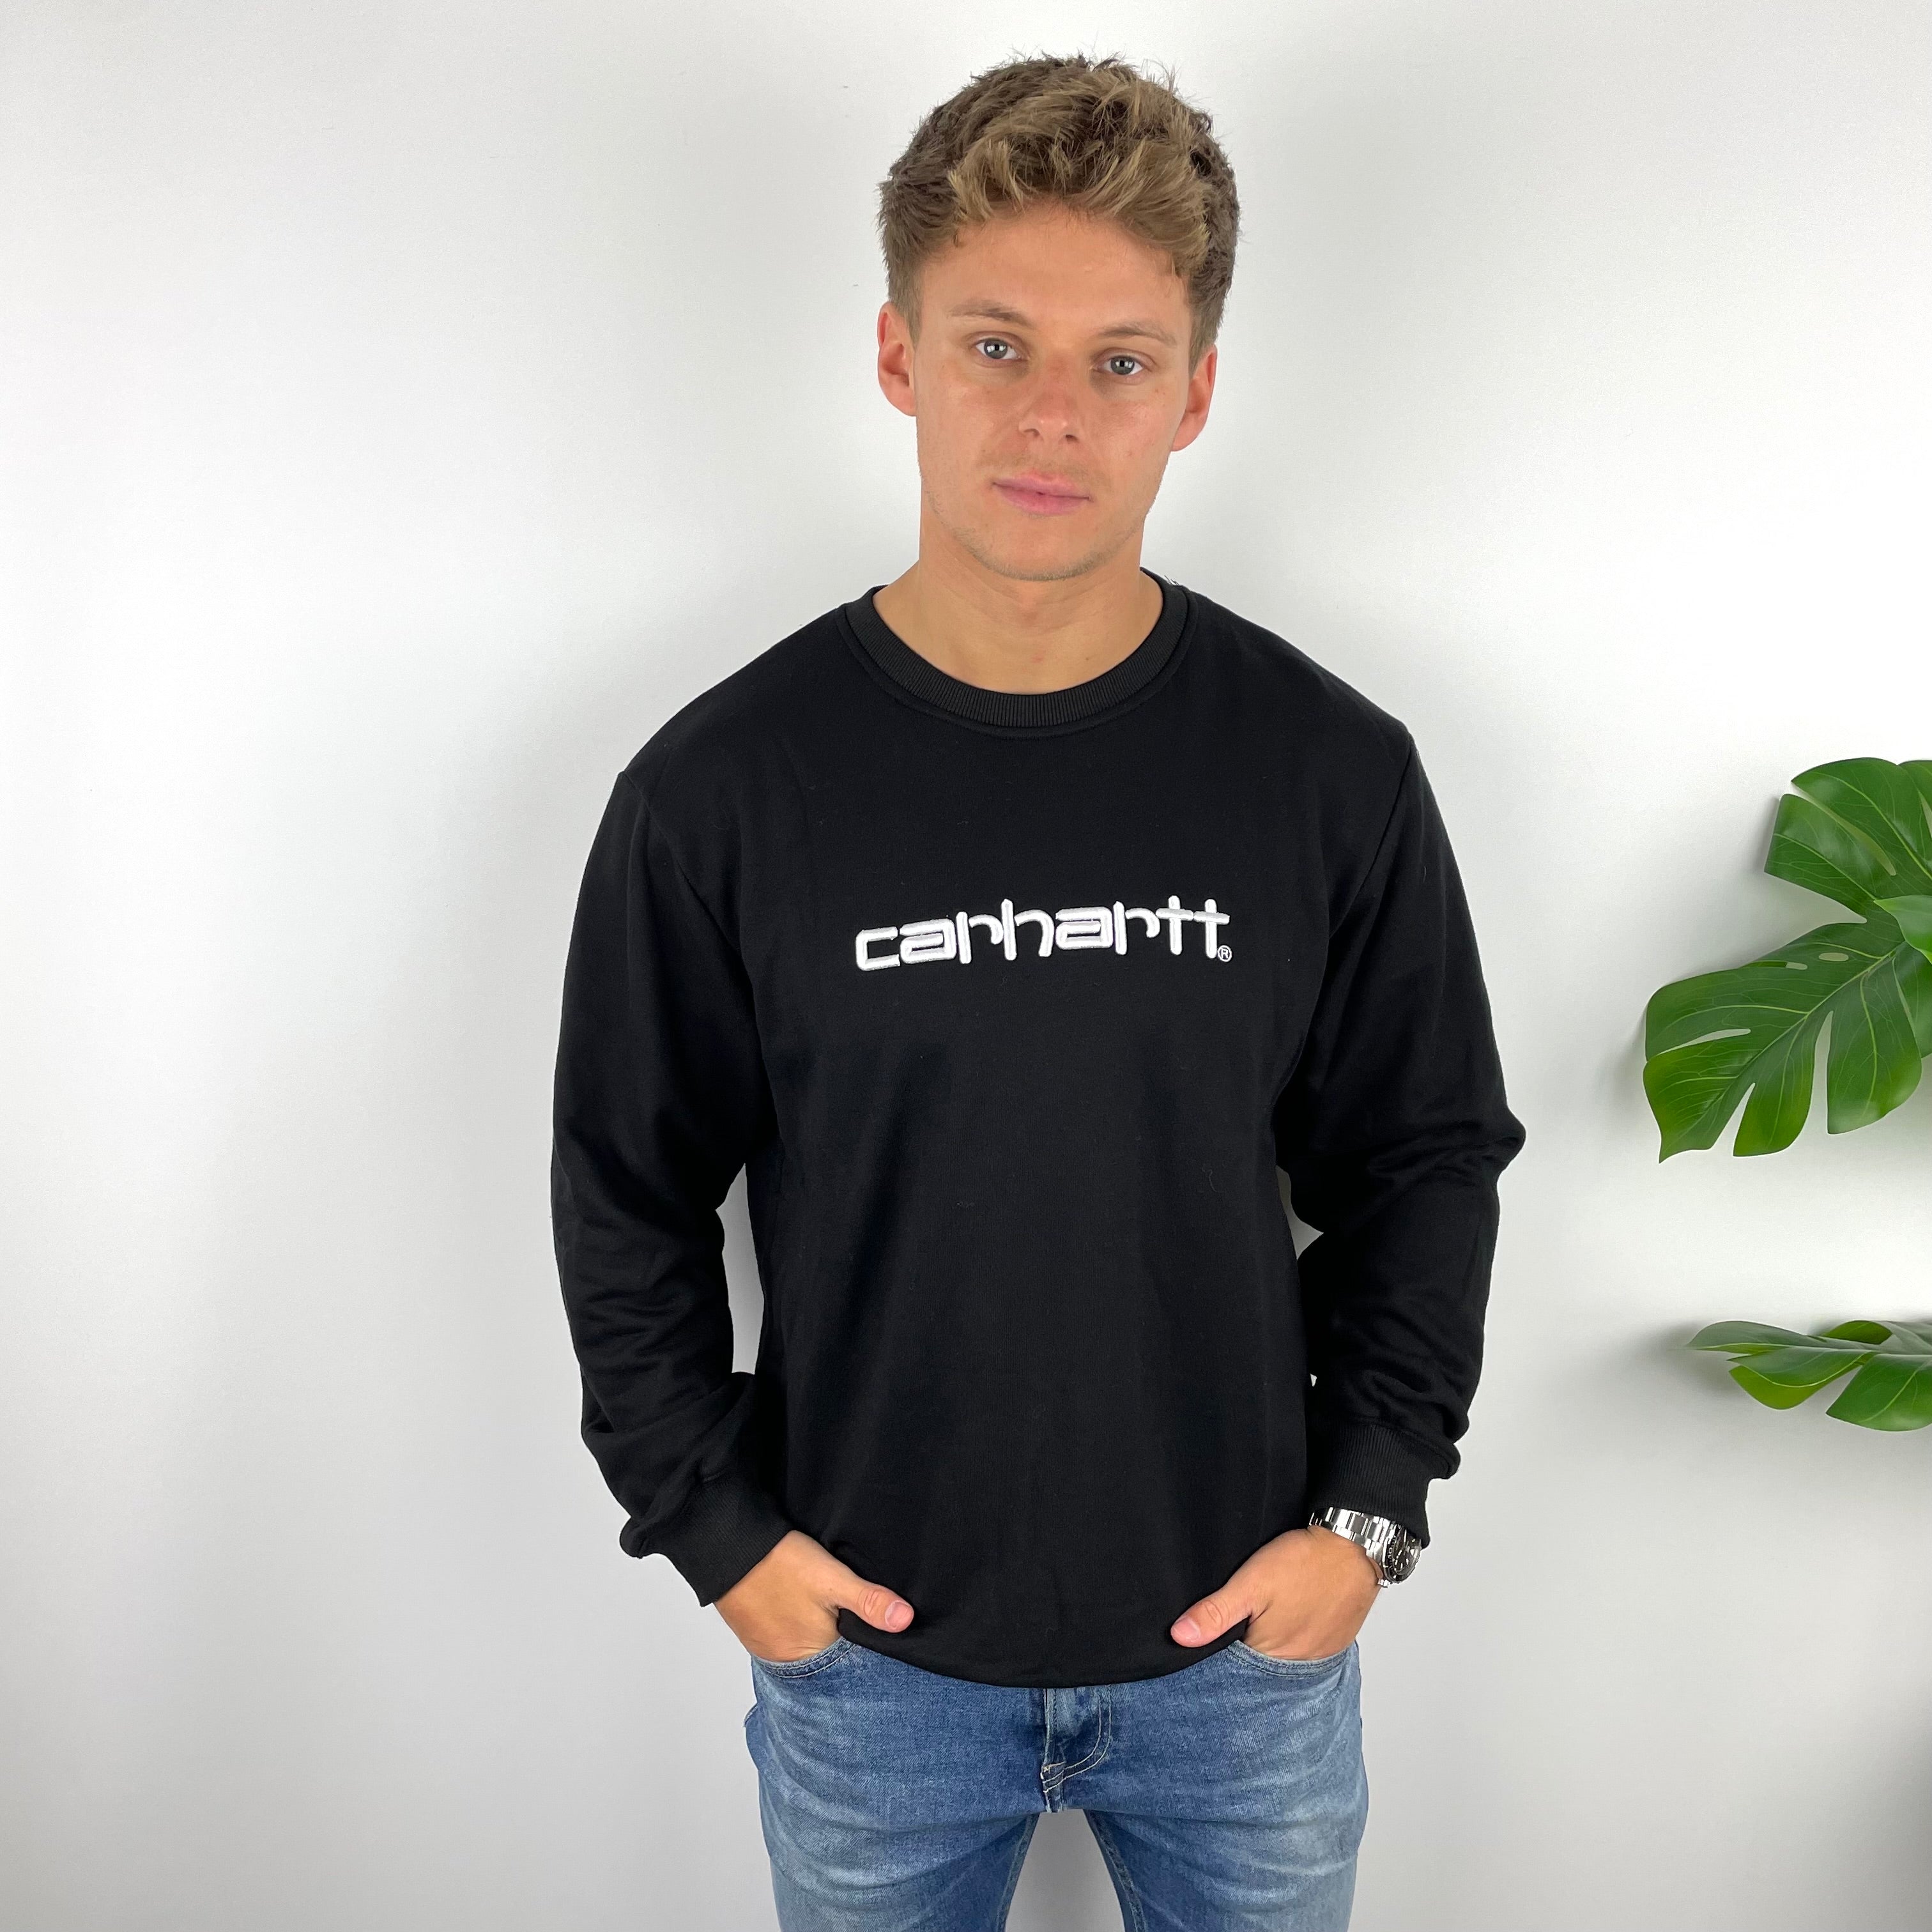 Carhartt RARE Black Embroidered Spell Out Sweatshirt (L)